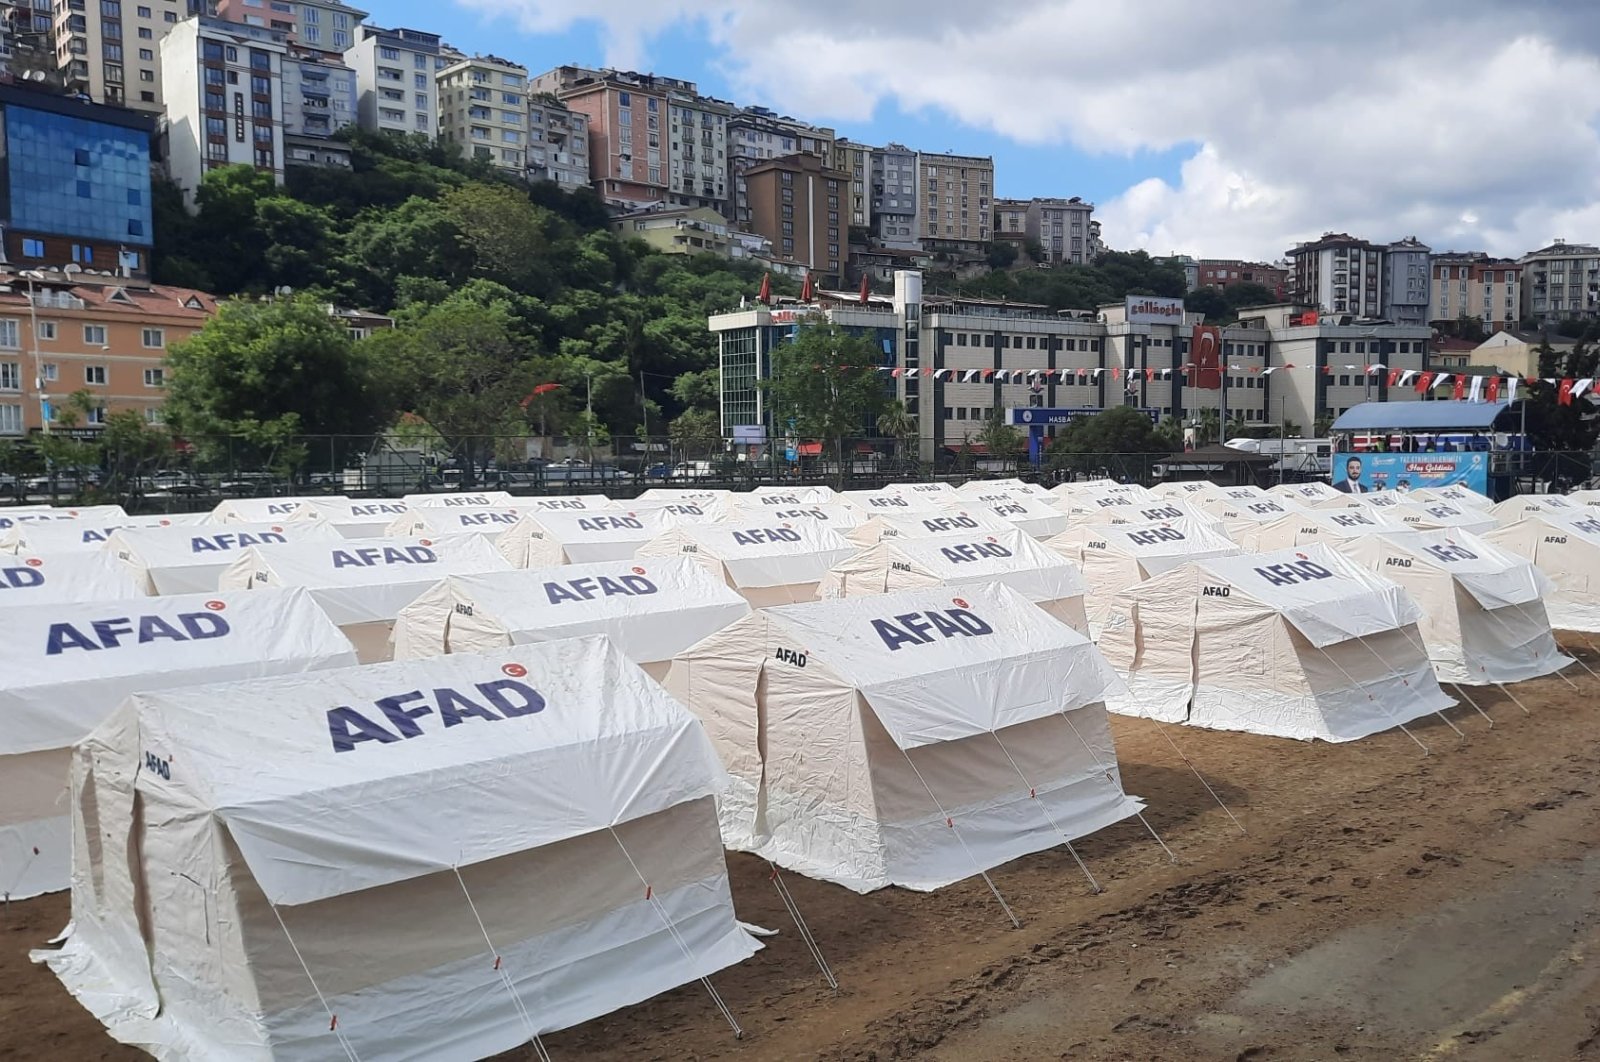 A view of tents set up in an evacuation exercise in Kağıthane district, Istanbul, Turkey, May 19, 2022. (İHA PHOTO)